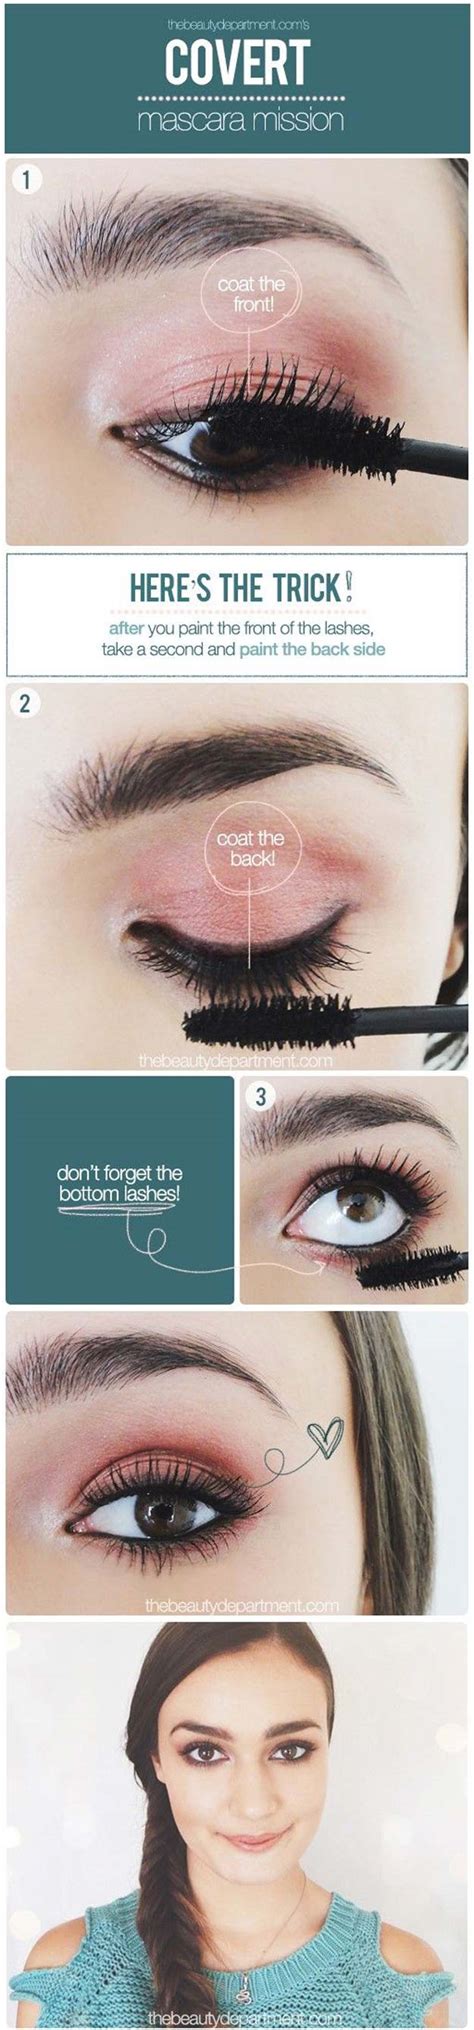 24 Cool Makeup Tutorials For Teens Diy Projects For Teens